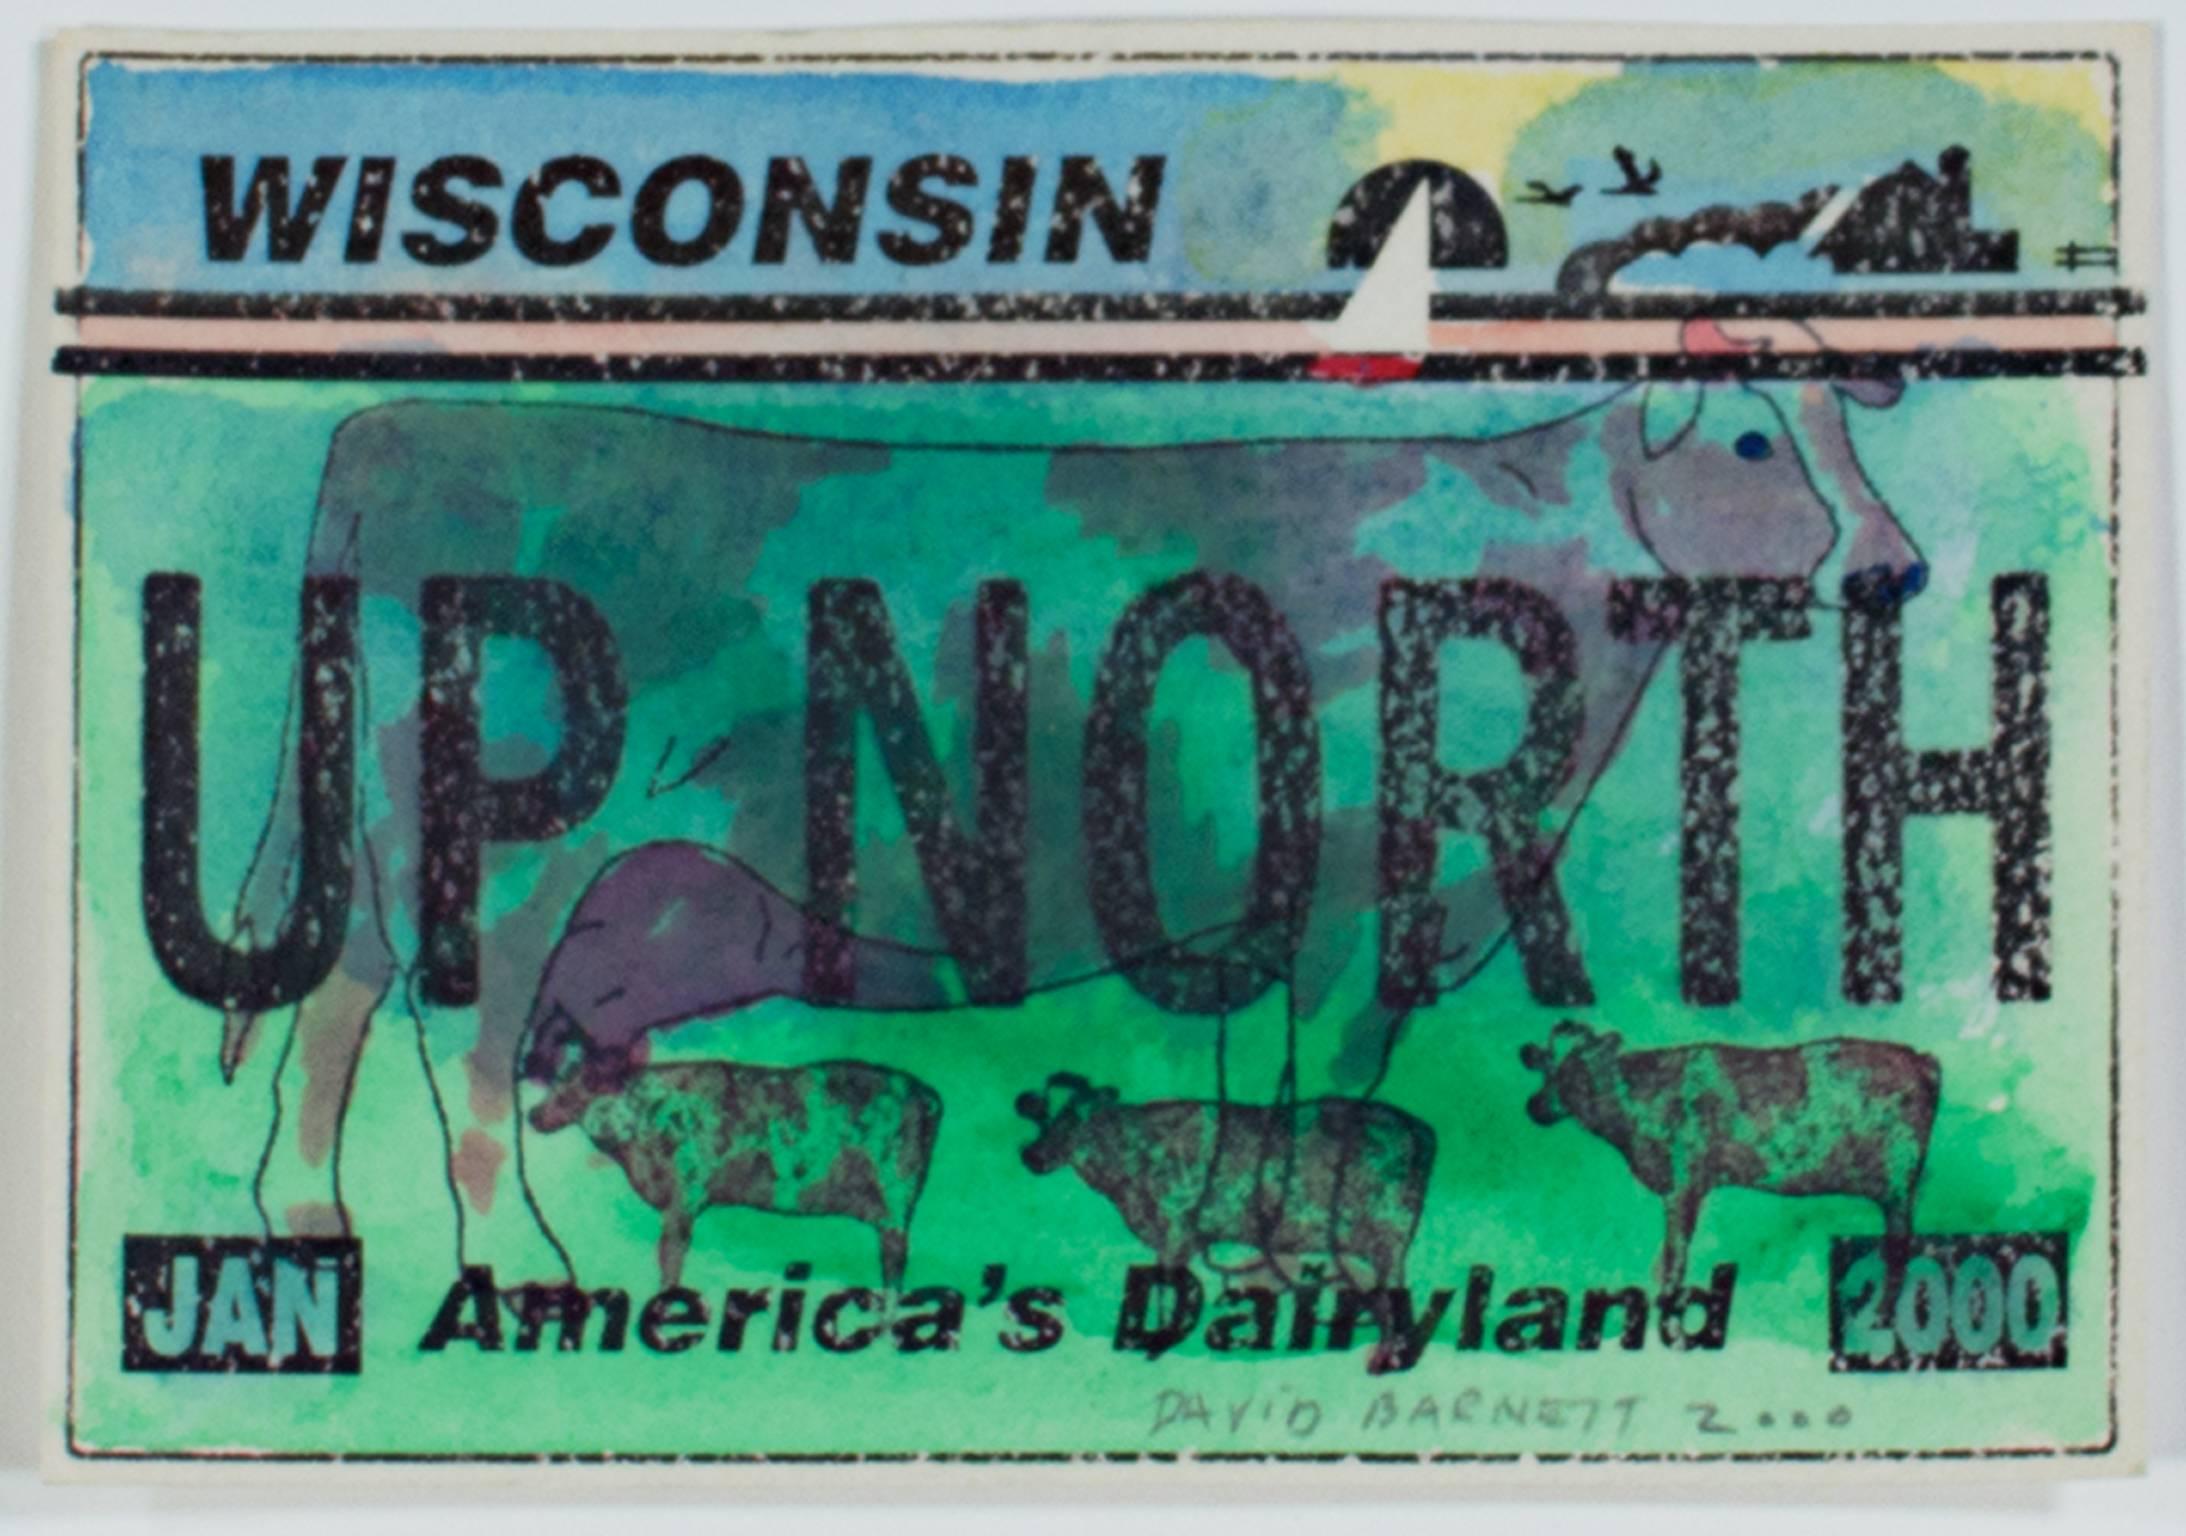 "Up North Wisconsin Series--Cows in Green Acres" is an original watercolor, ink, and rubber stamp artwork. The artist signed and dated the piece in the lower right. This artwork depicts the Wisconsin license plate with cows. 

3 3/4" x 5 1/2"